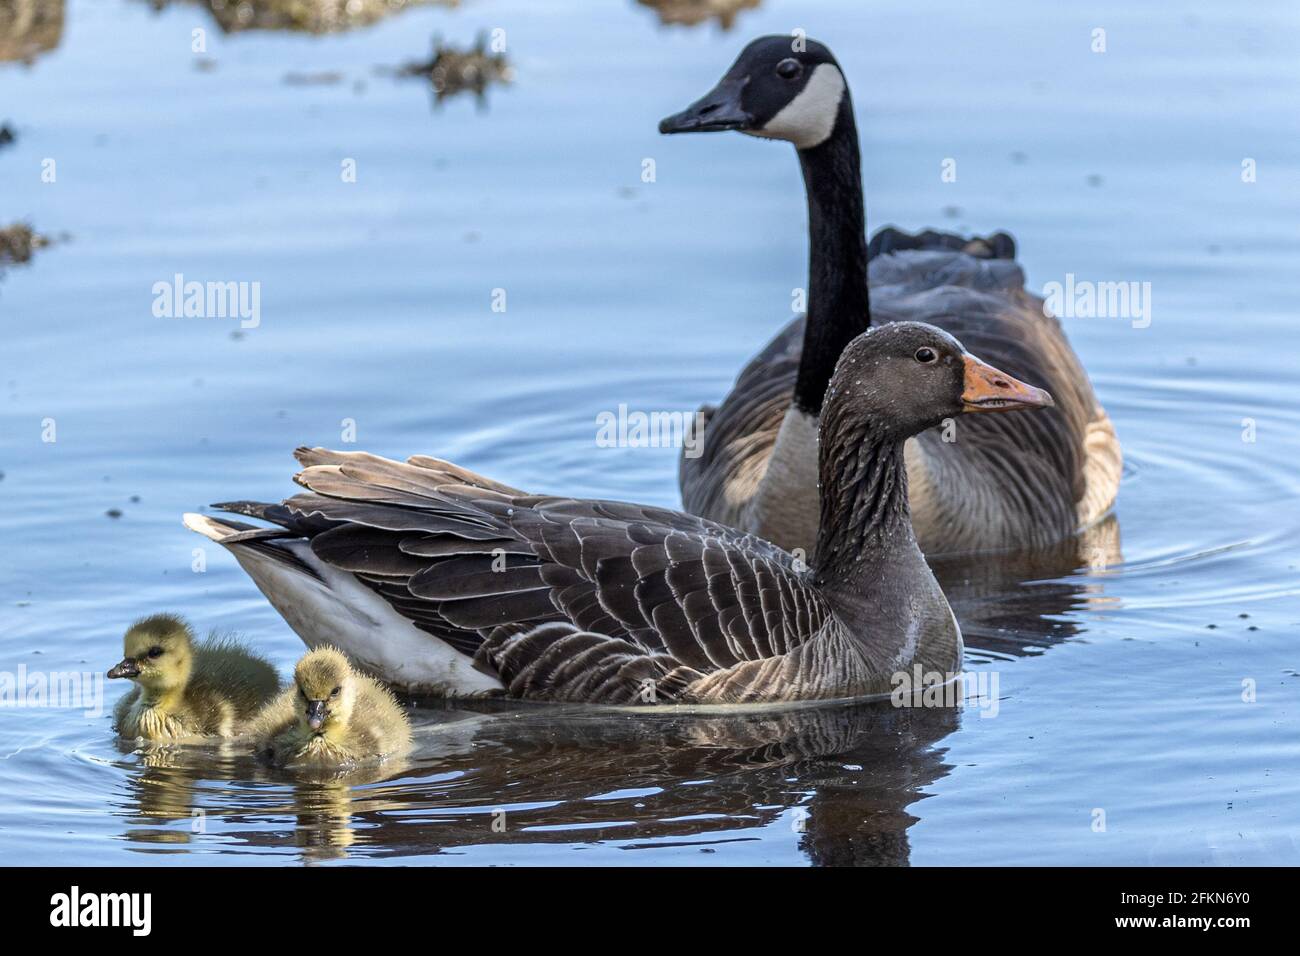 Greylag or graylag goose, Anser anser, with goslings, watching aggressive Canada goose, Branta canadensis, National Trust, Brownsea Island, Dorset, UK Stock Photo